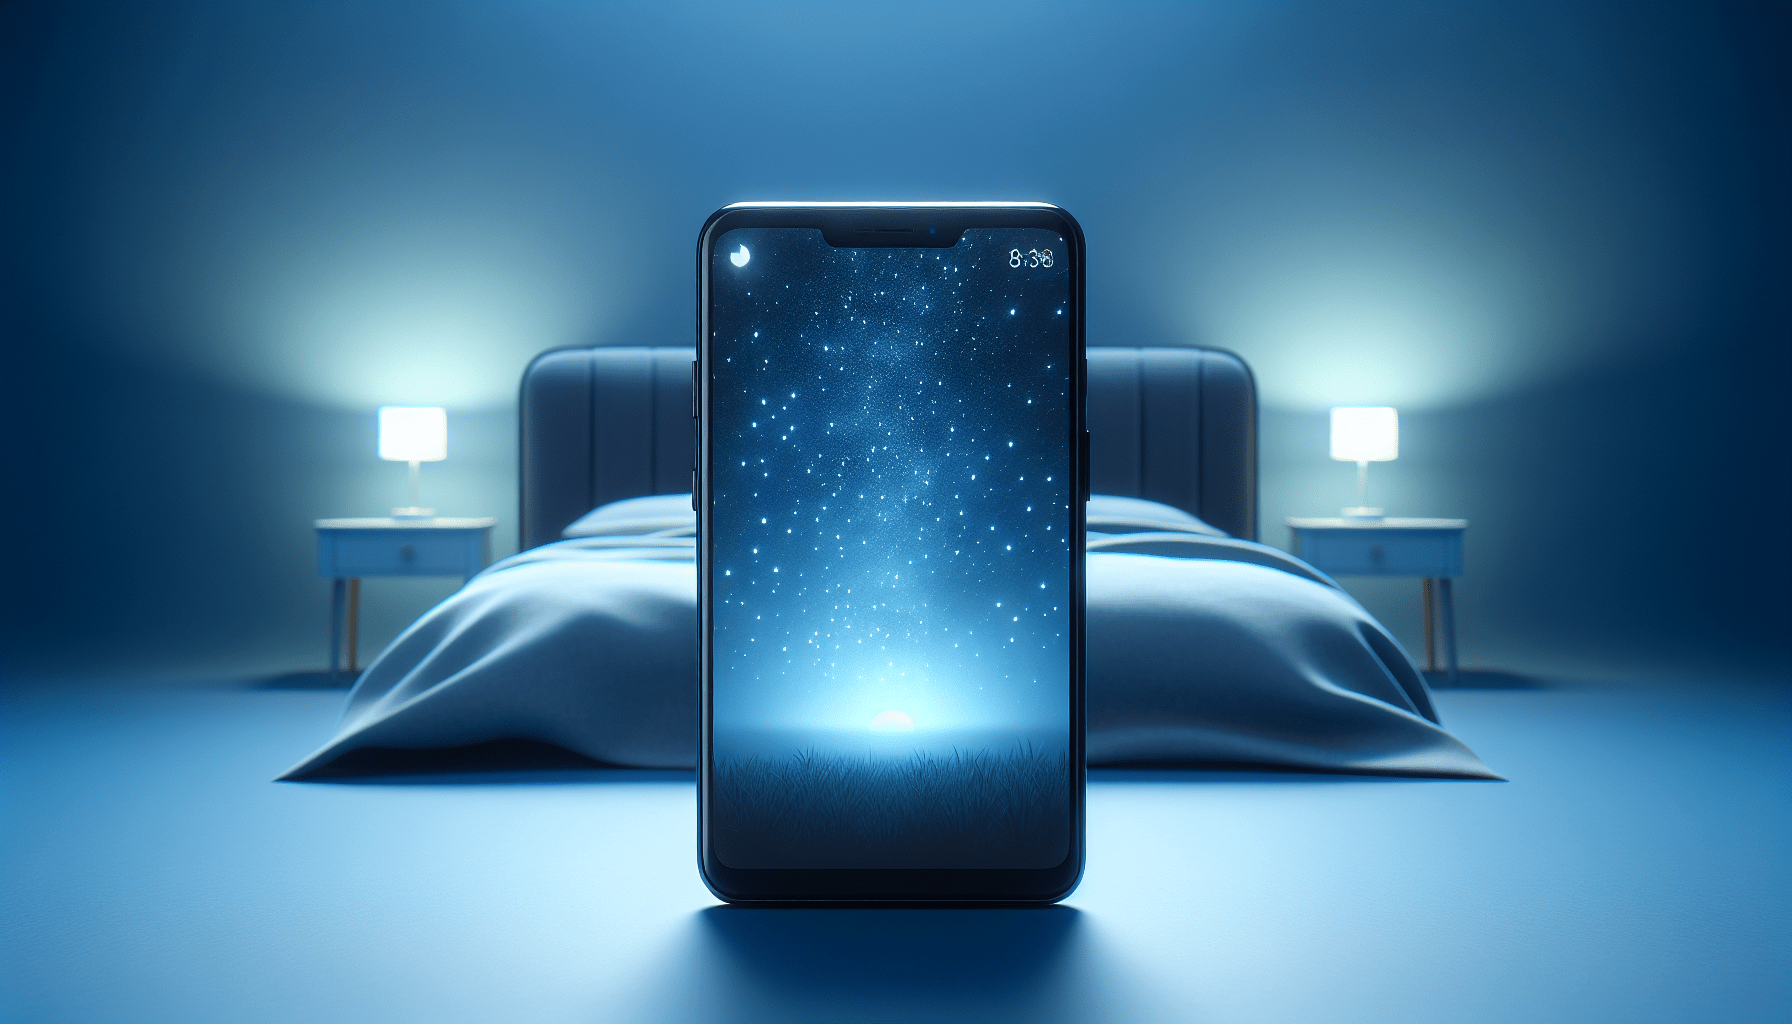 Best Sleep Apps For Monitoring And Improving Sleep